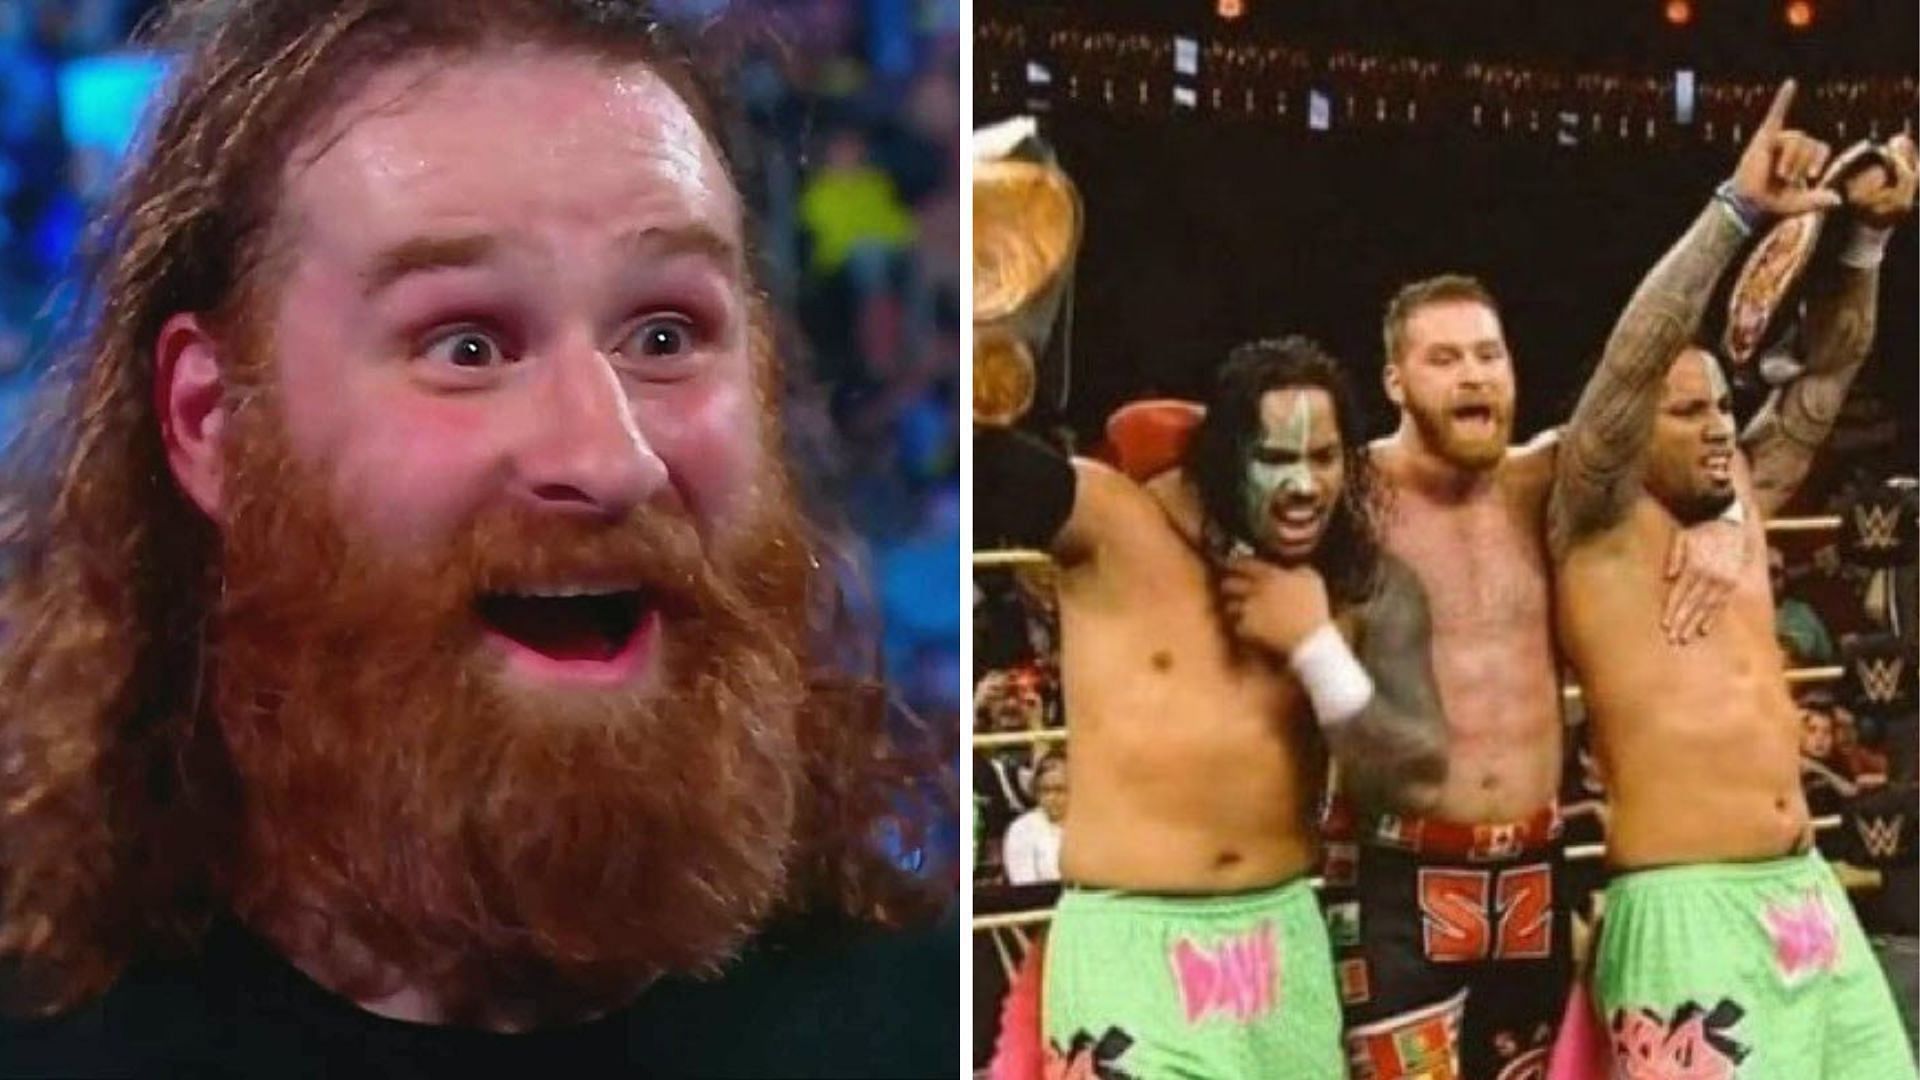 Sami Zayn seemingly always wanted to be a part of The Bloodline in WWE.